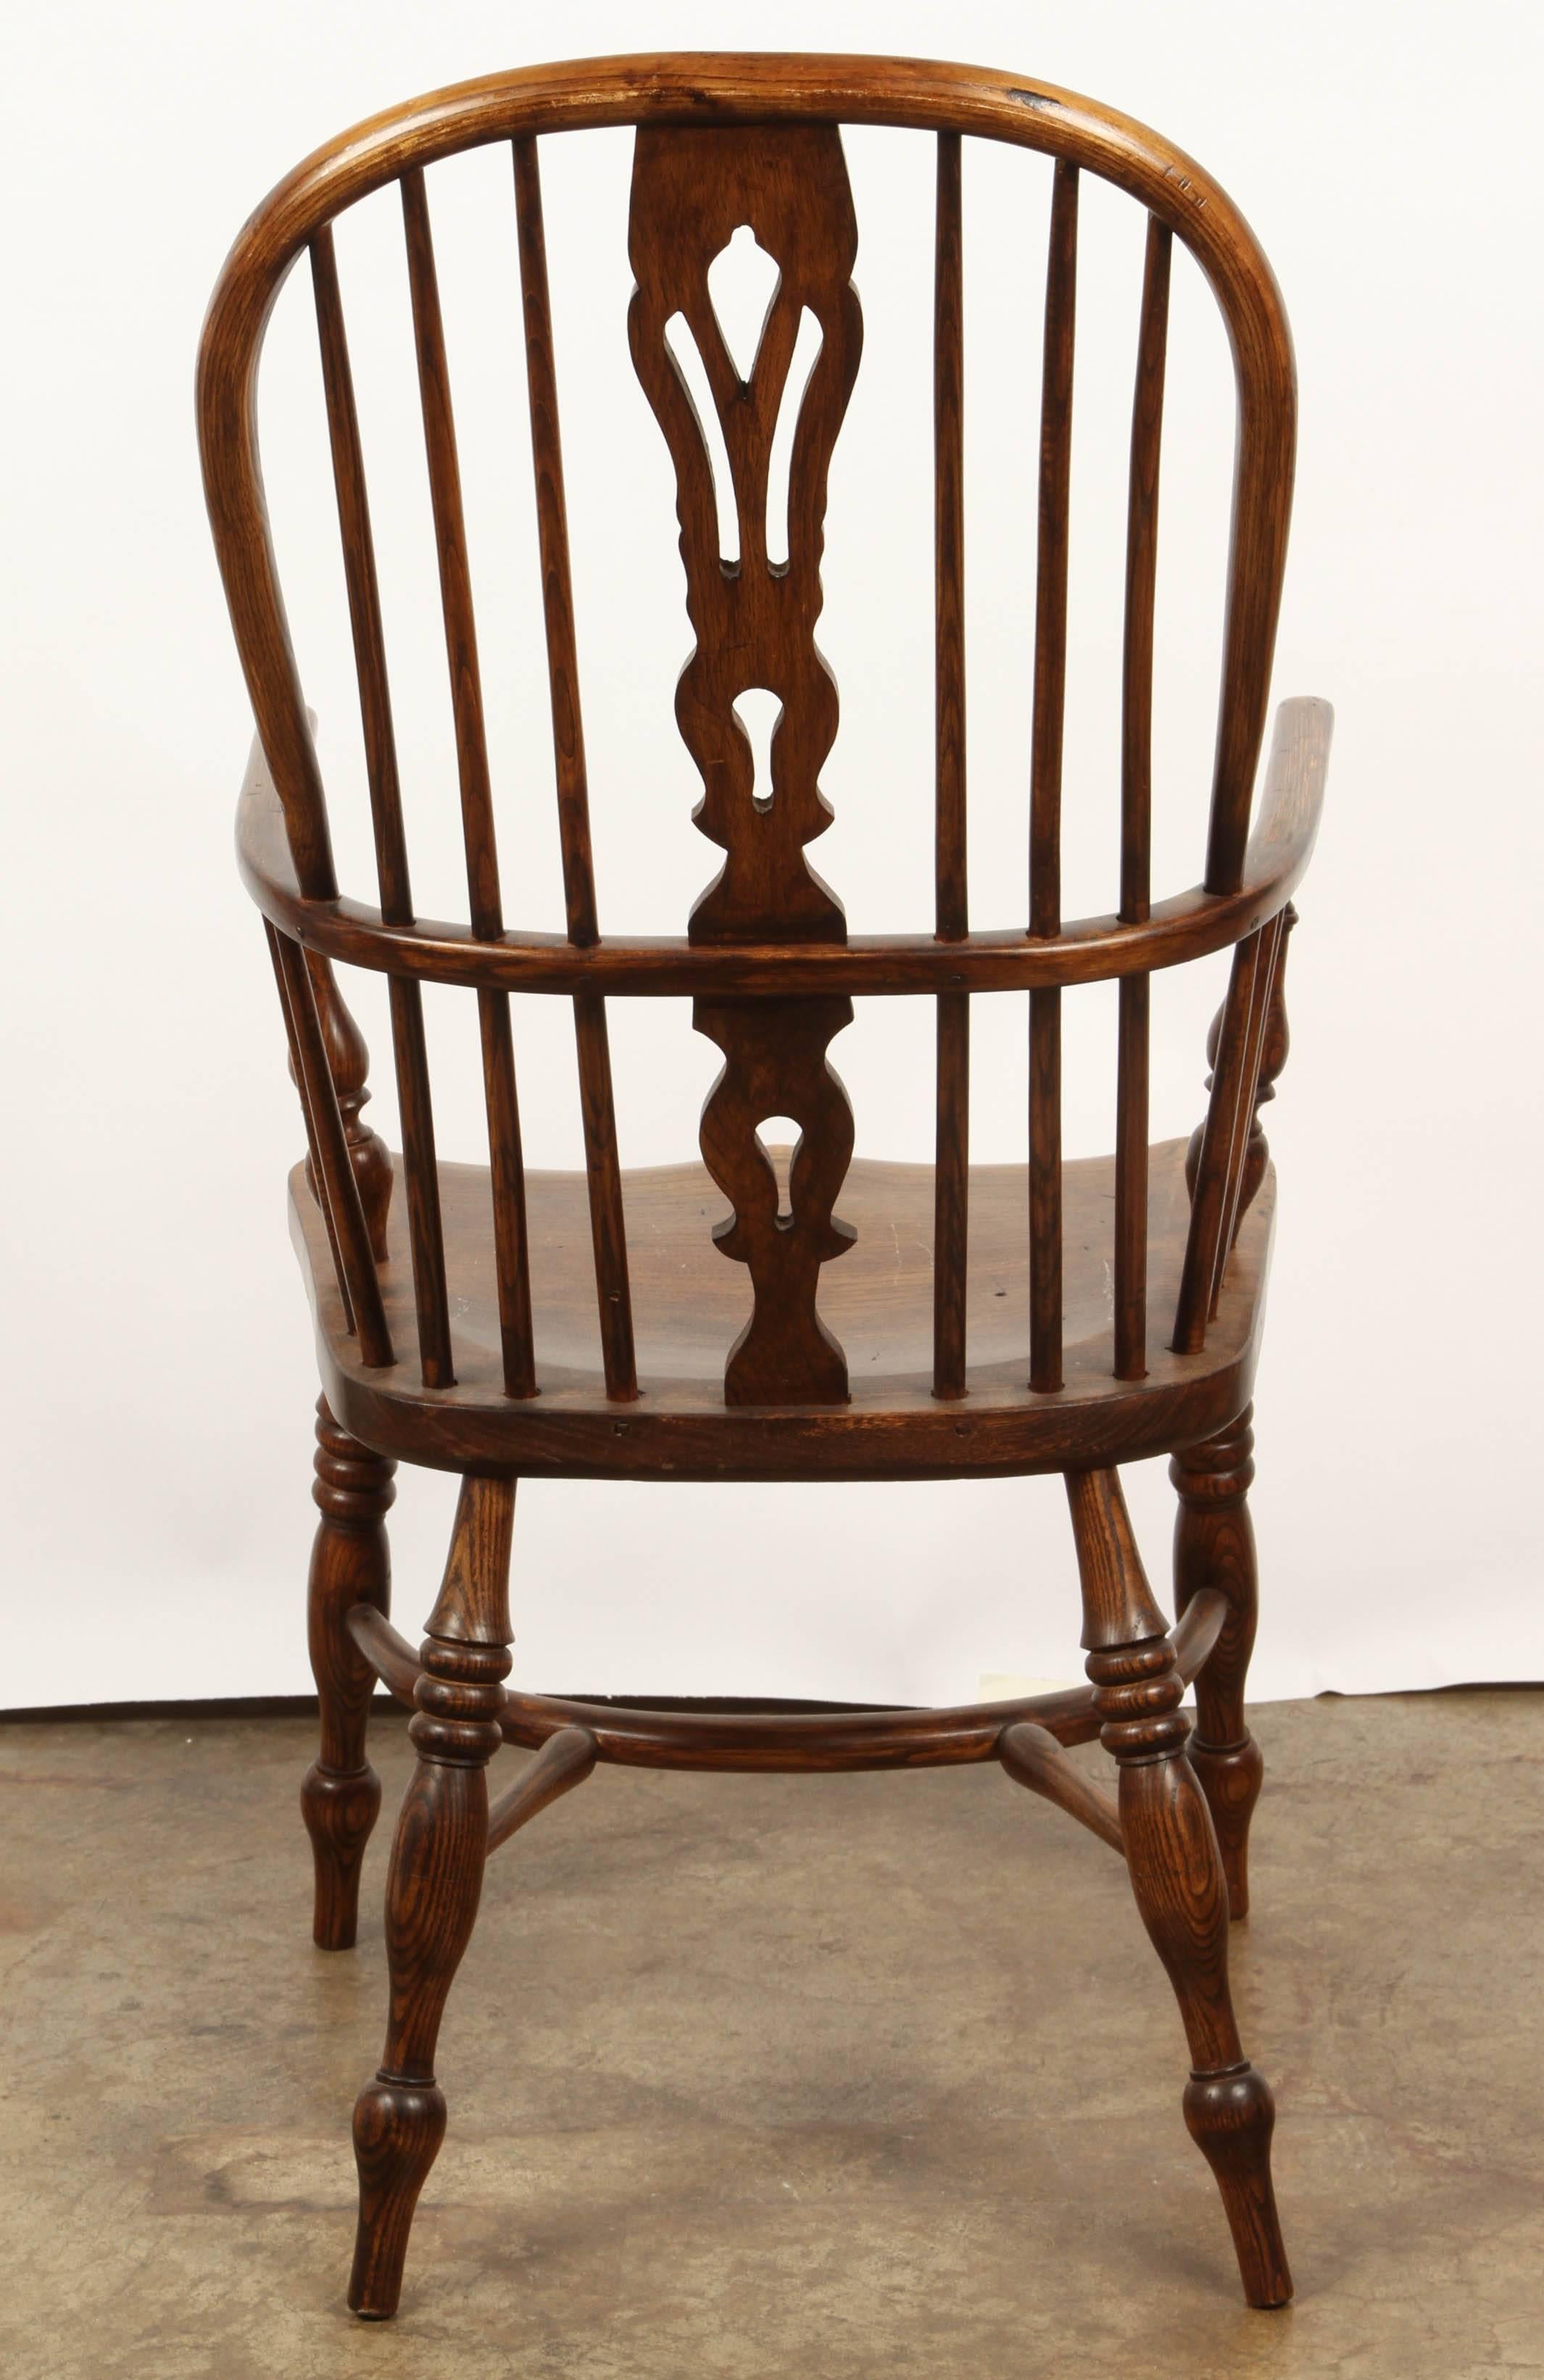 One English Yew High Back Chair 2